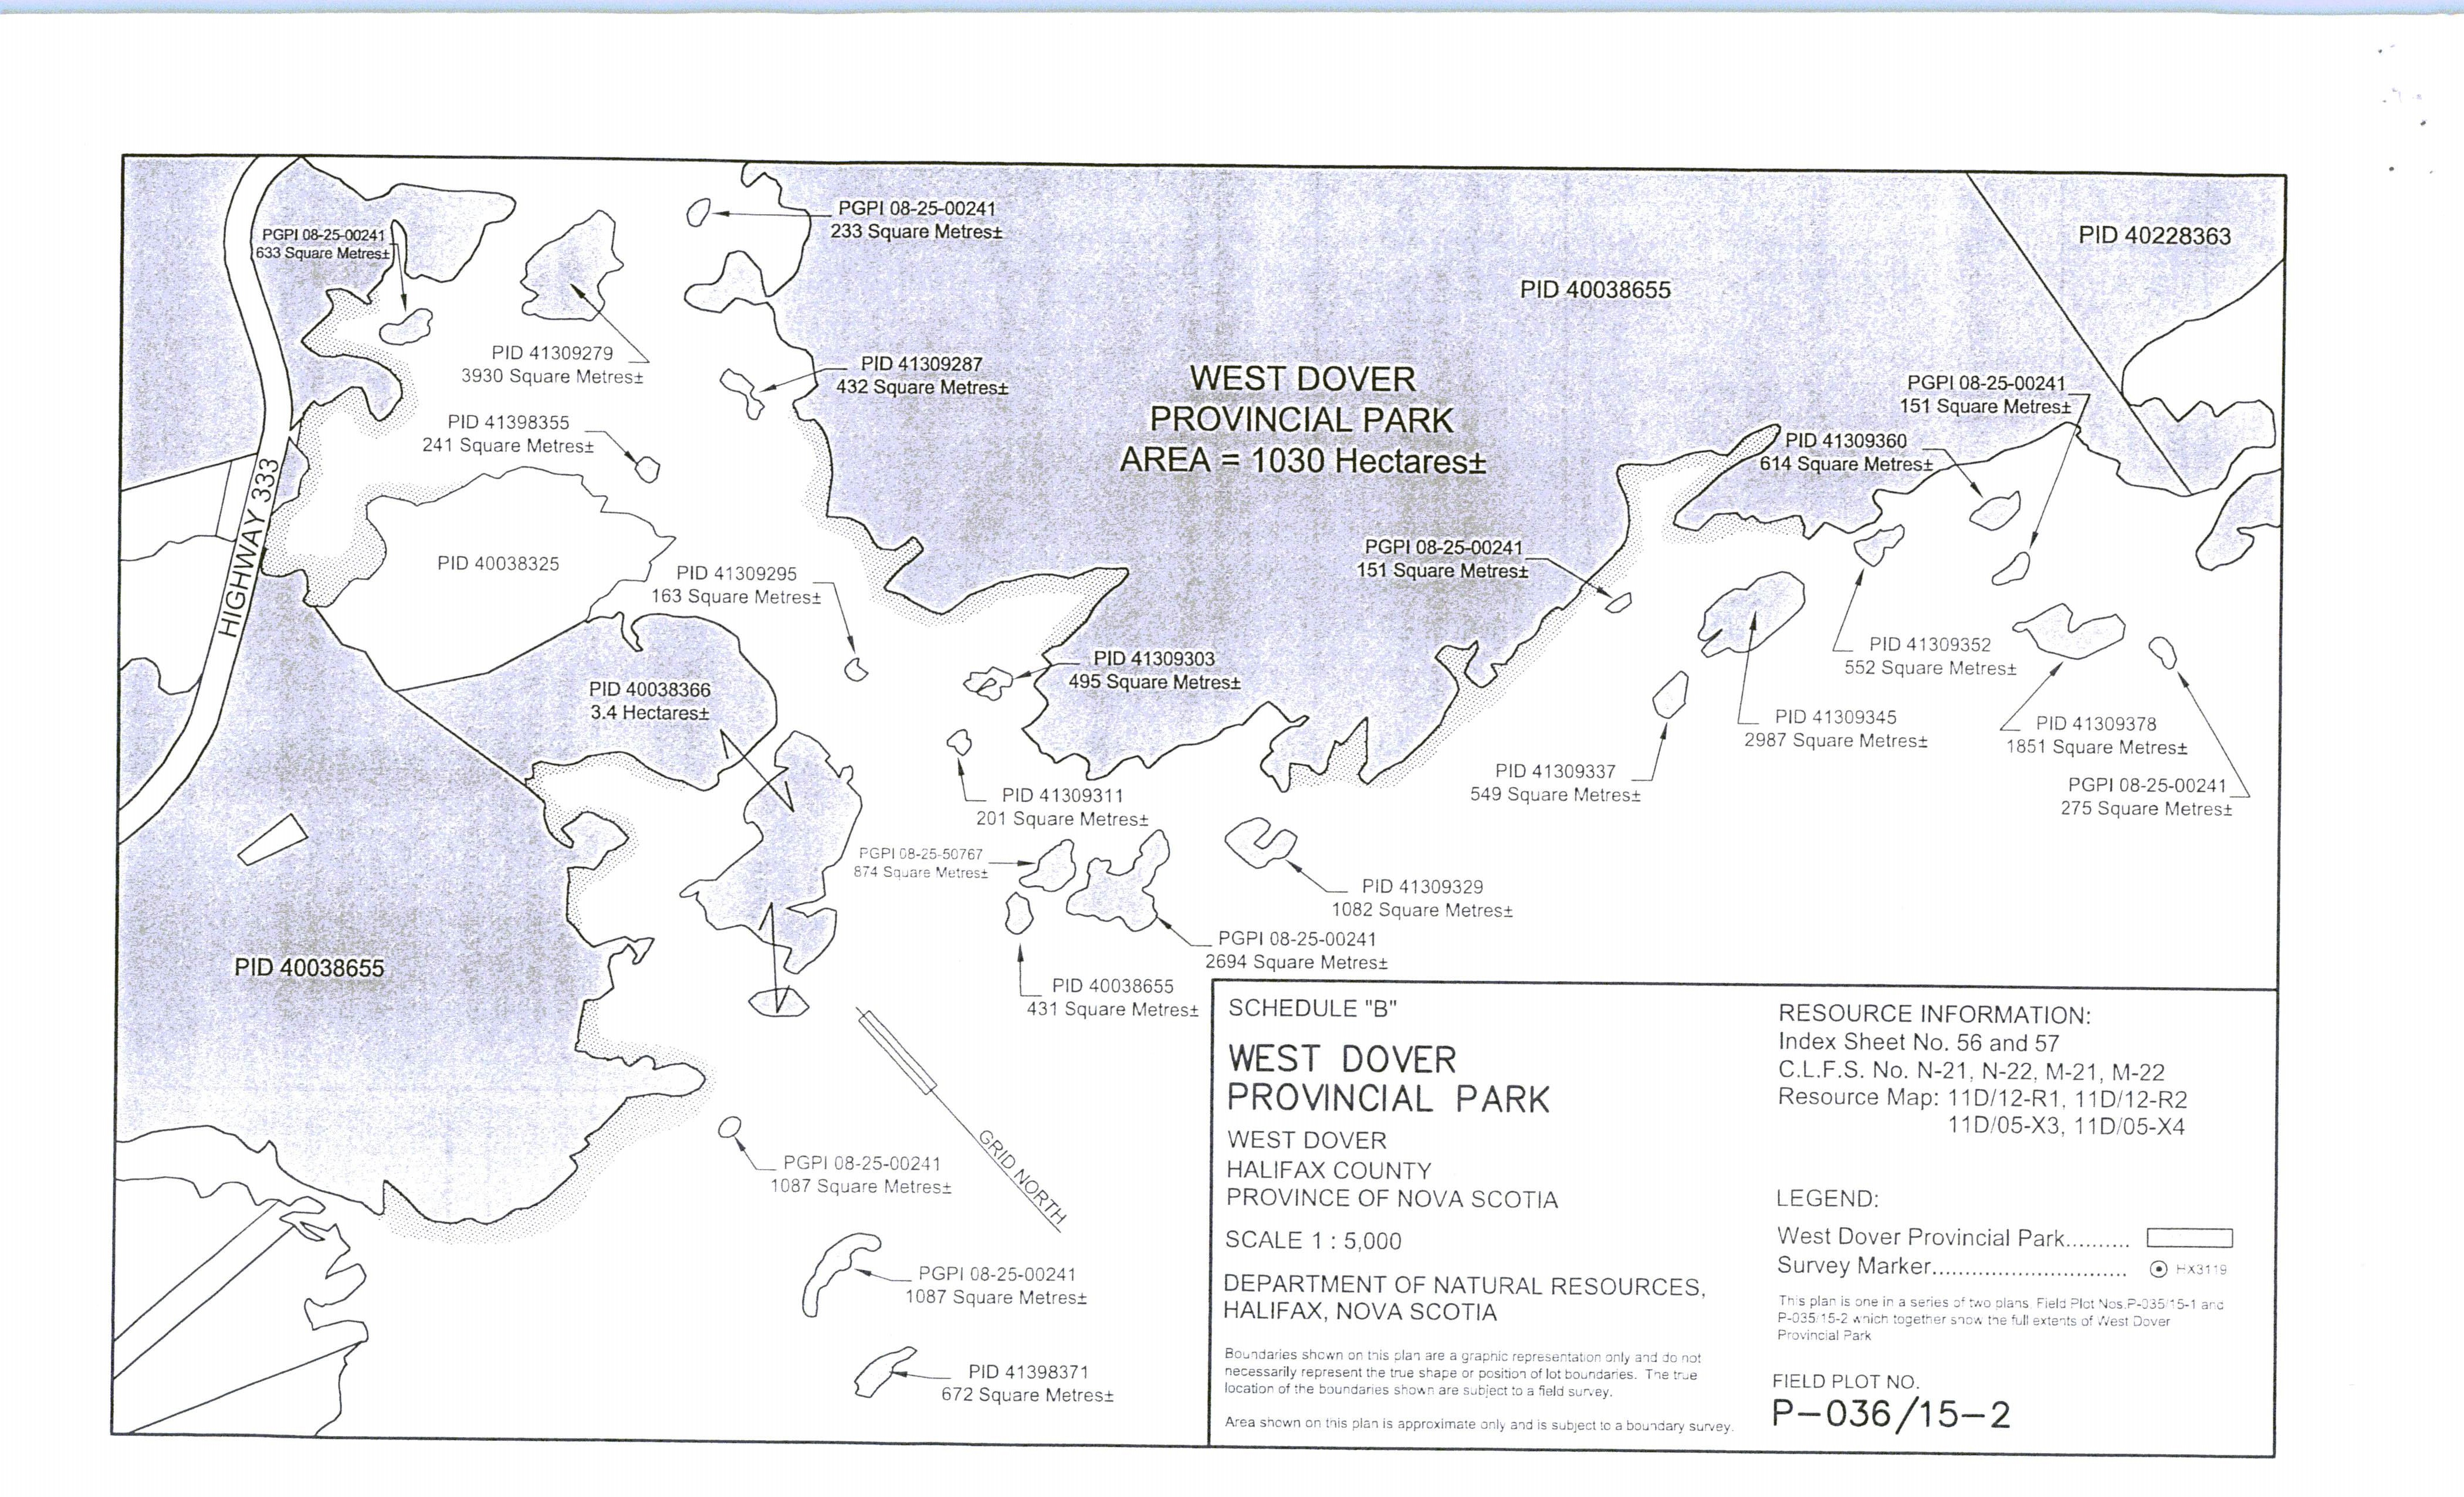 Approximate boundaries of West Dover Provincial Park - Schedule B